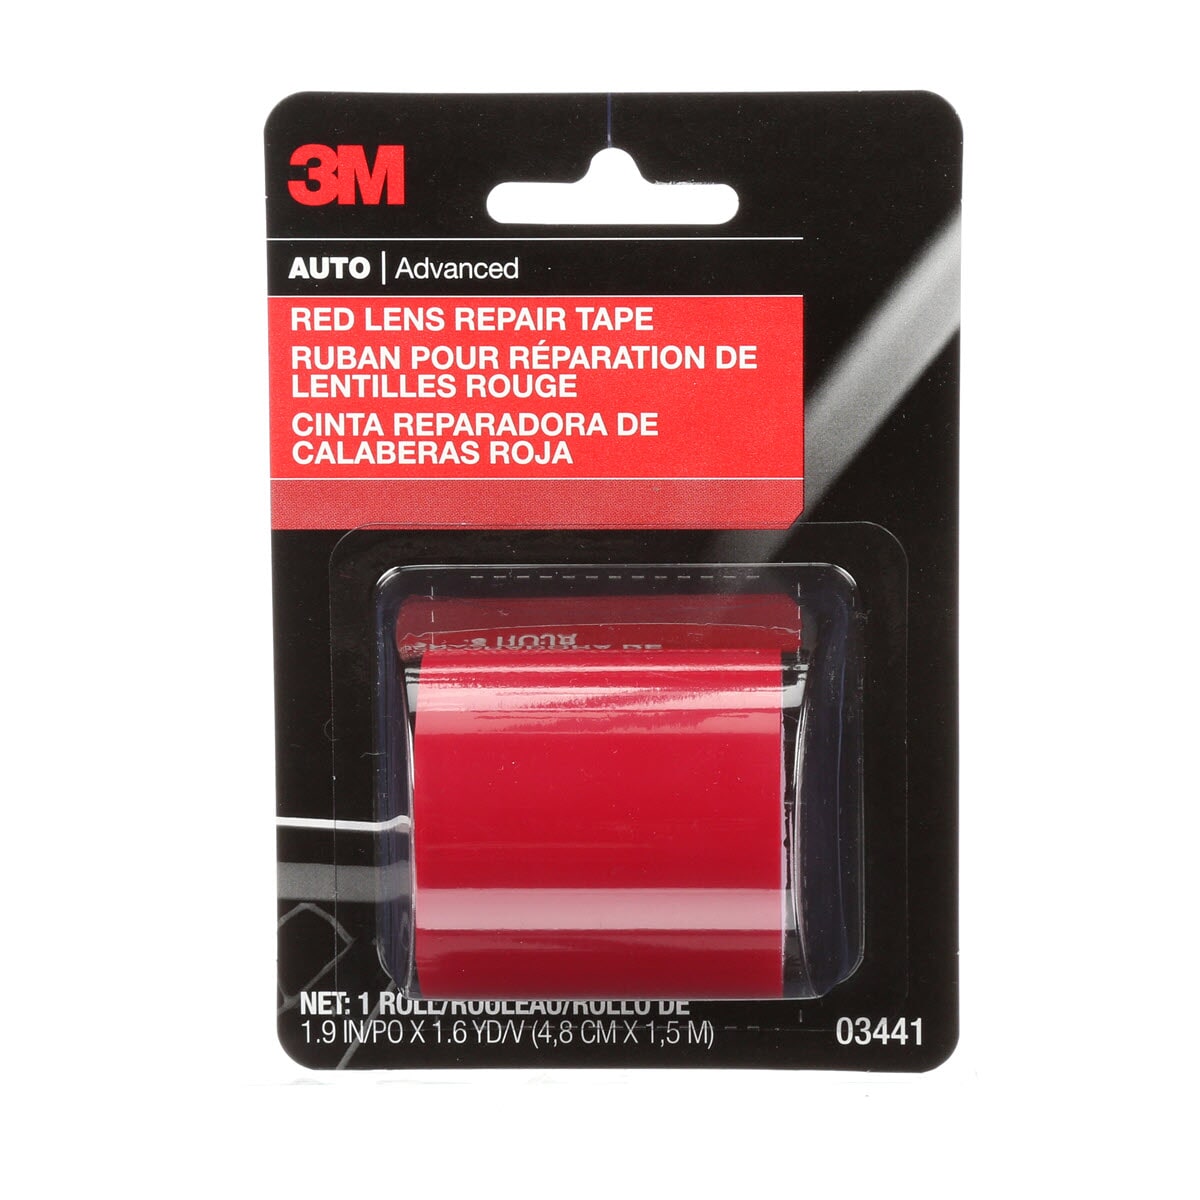 3M 7100015032 Non-Reflective Lens Repair Tape, 60 in L x 1-7/8 in W, Red